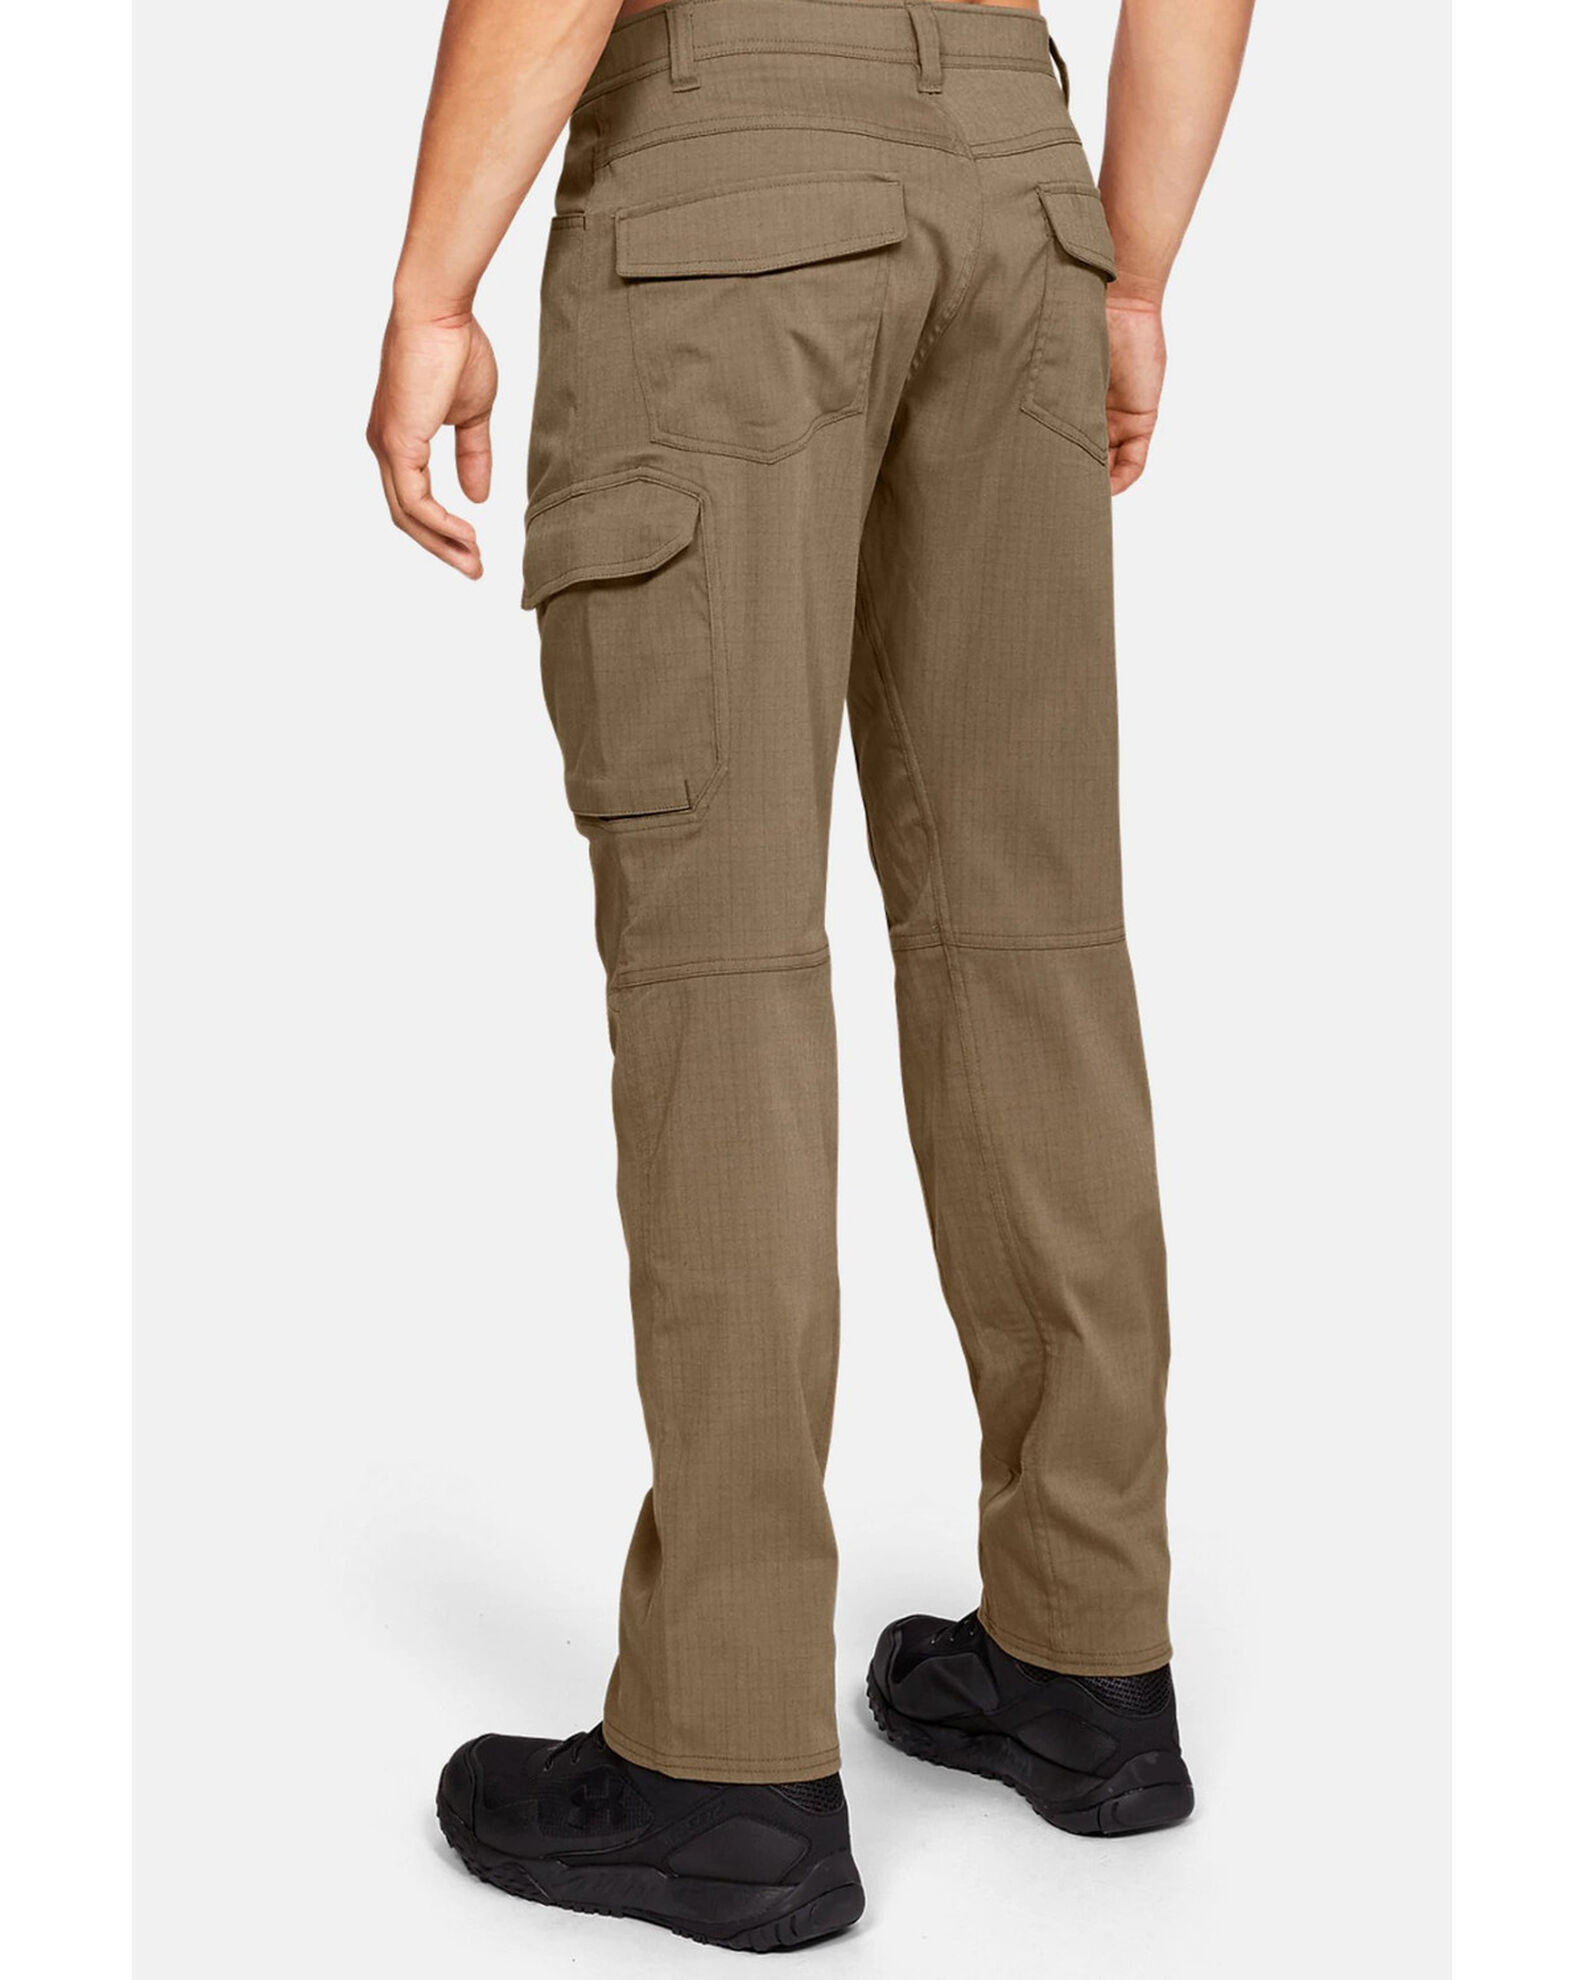 Under Armour Men's Tan Tactical Enduro Cargo Work Pants - Country Outfitter